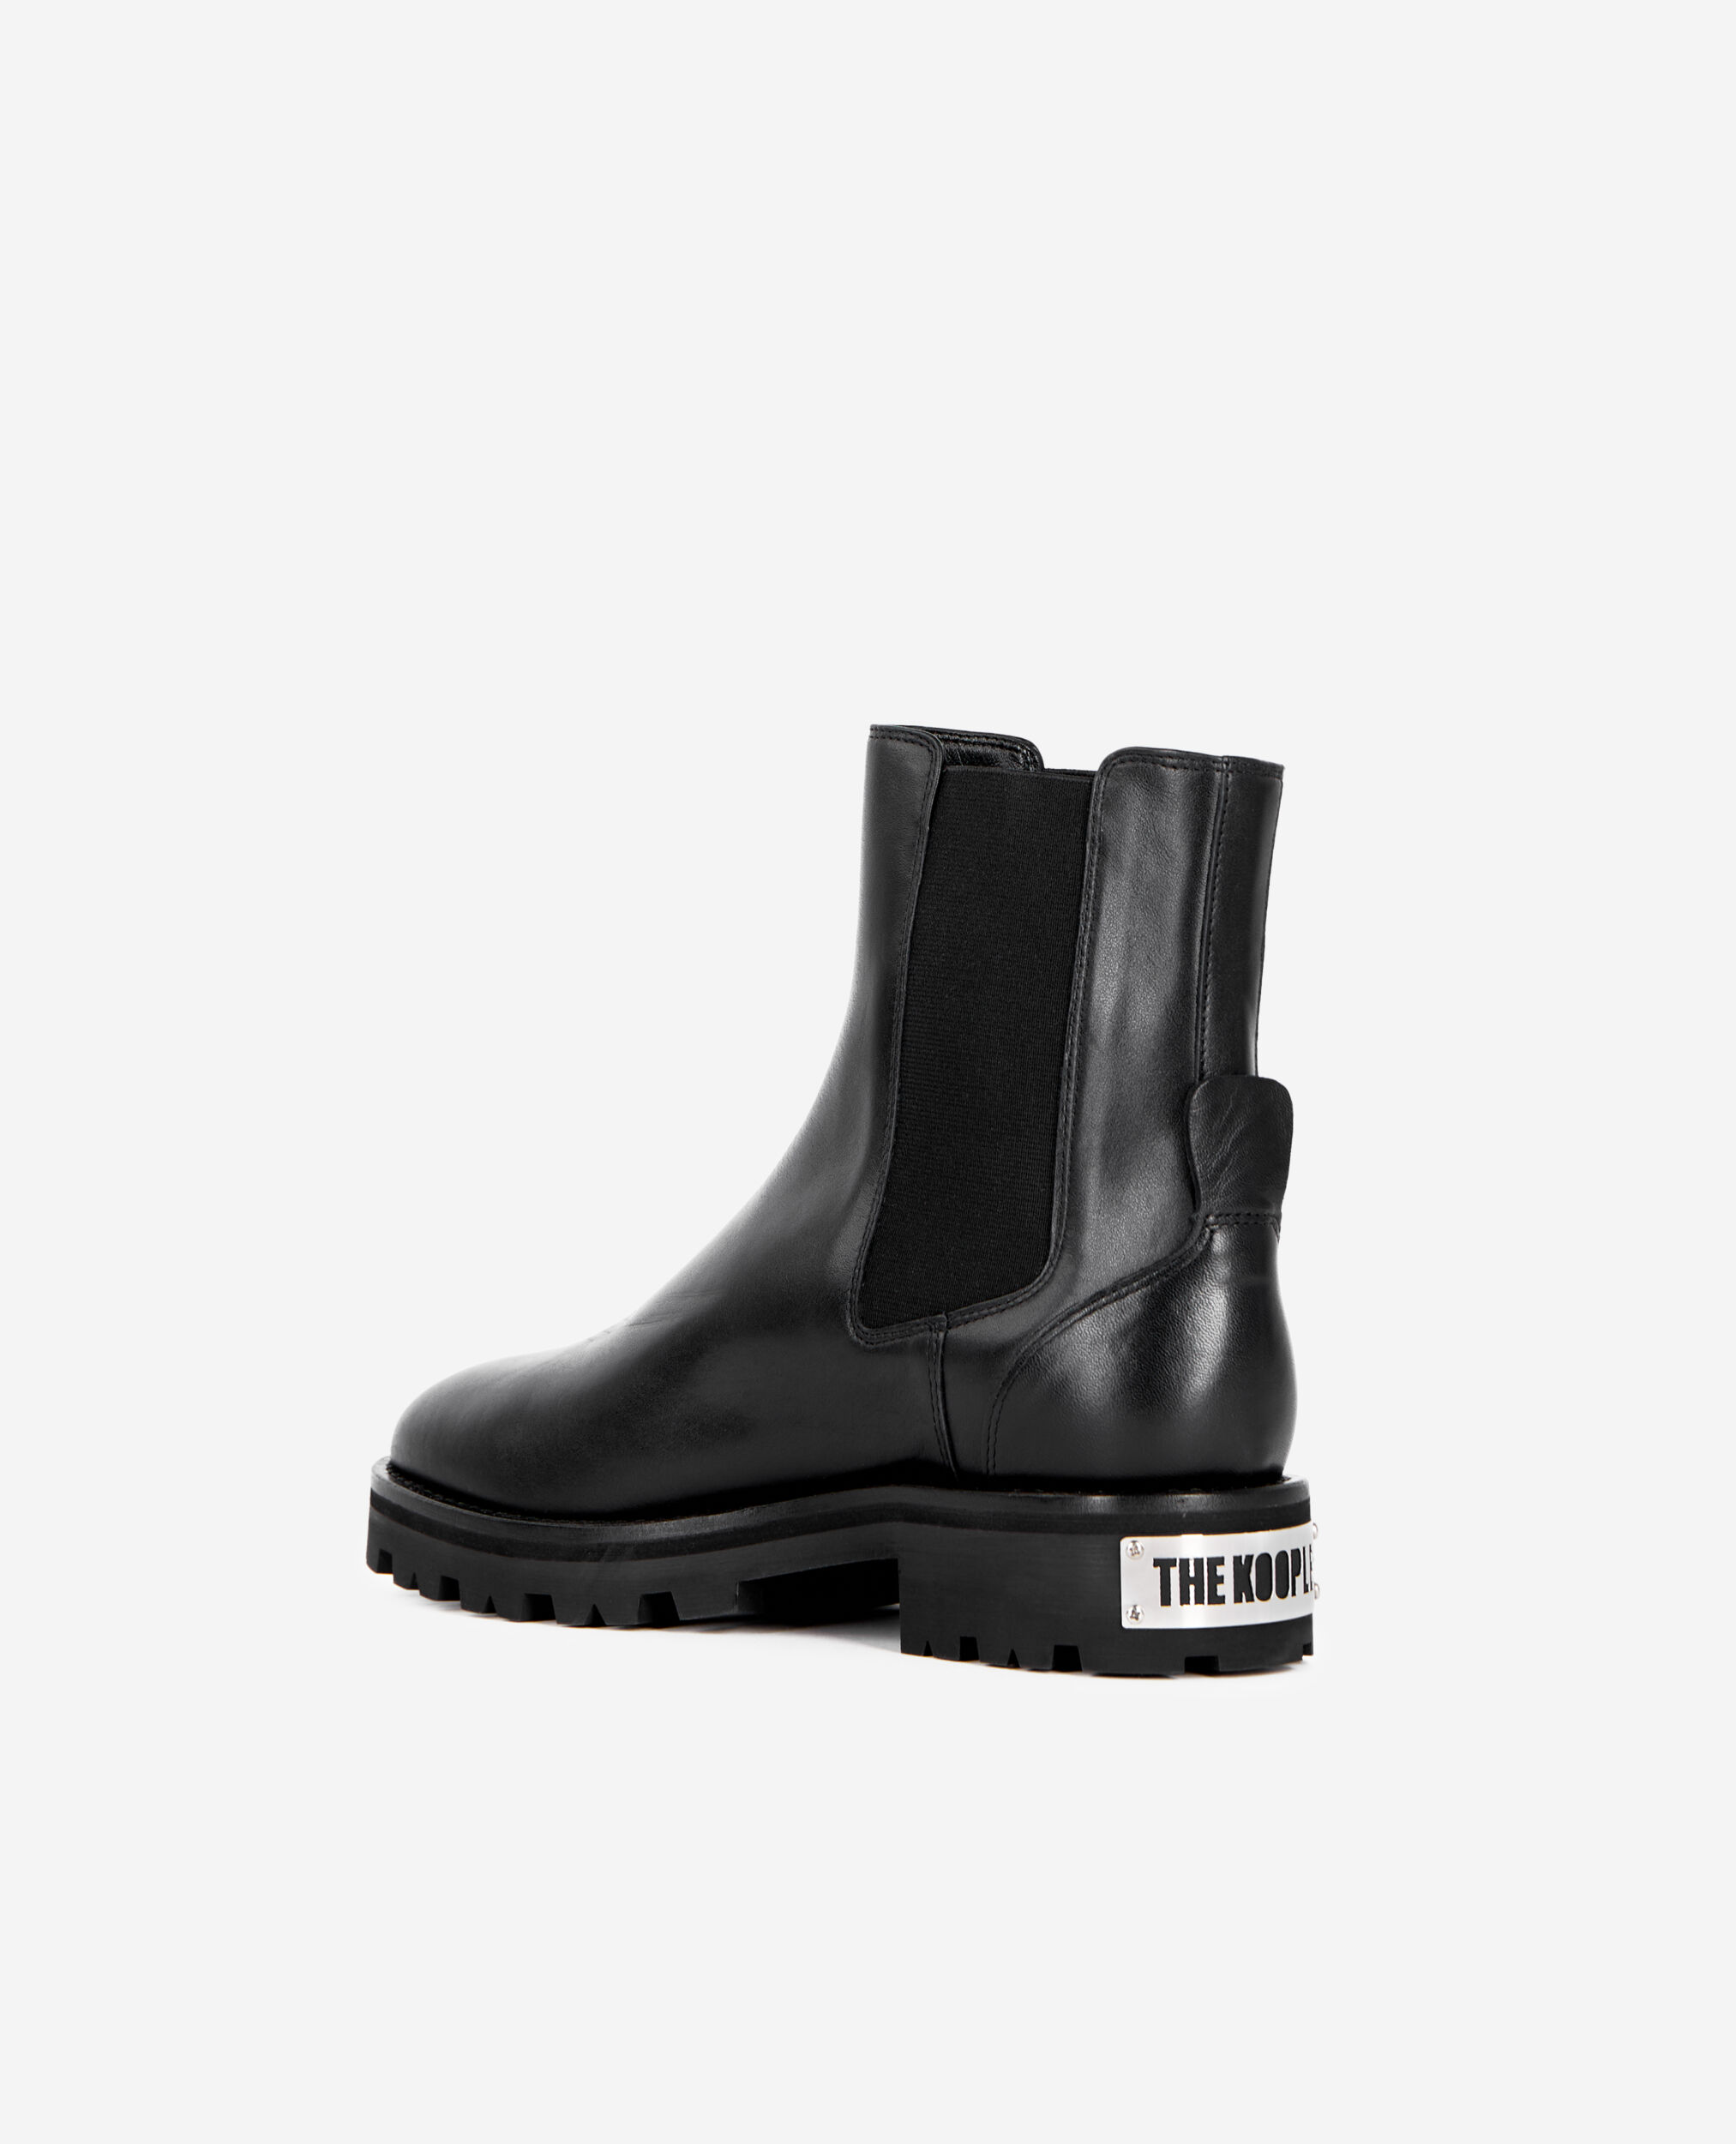 Chelsea boots in black leather, BLACK, hi-res image number null